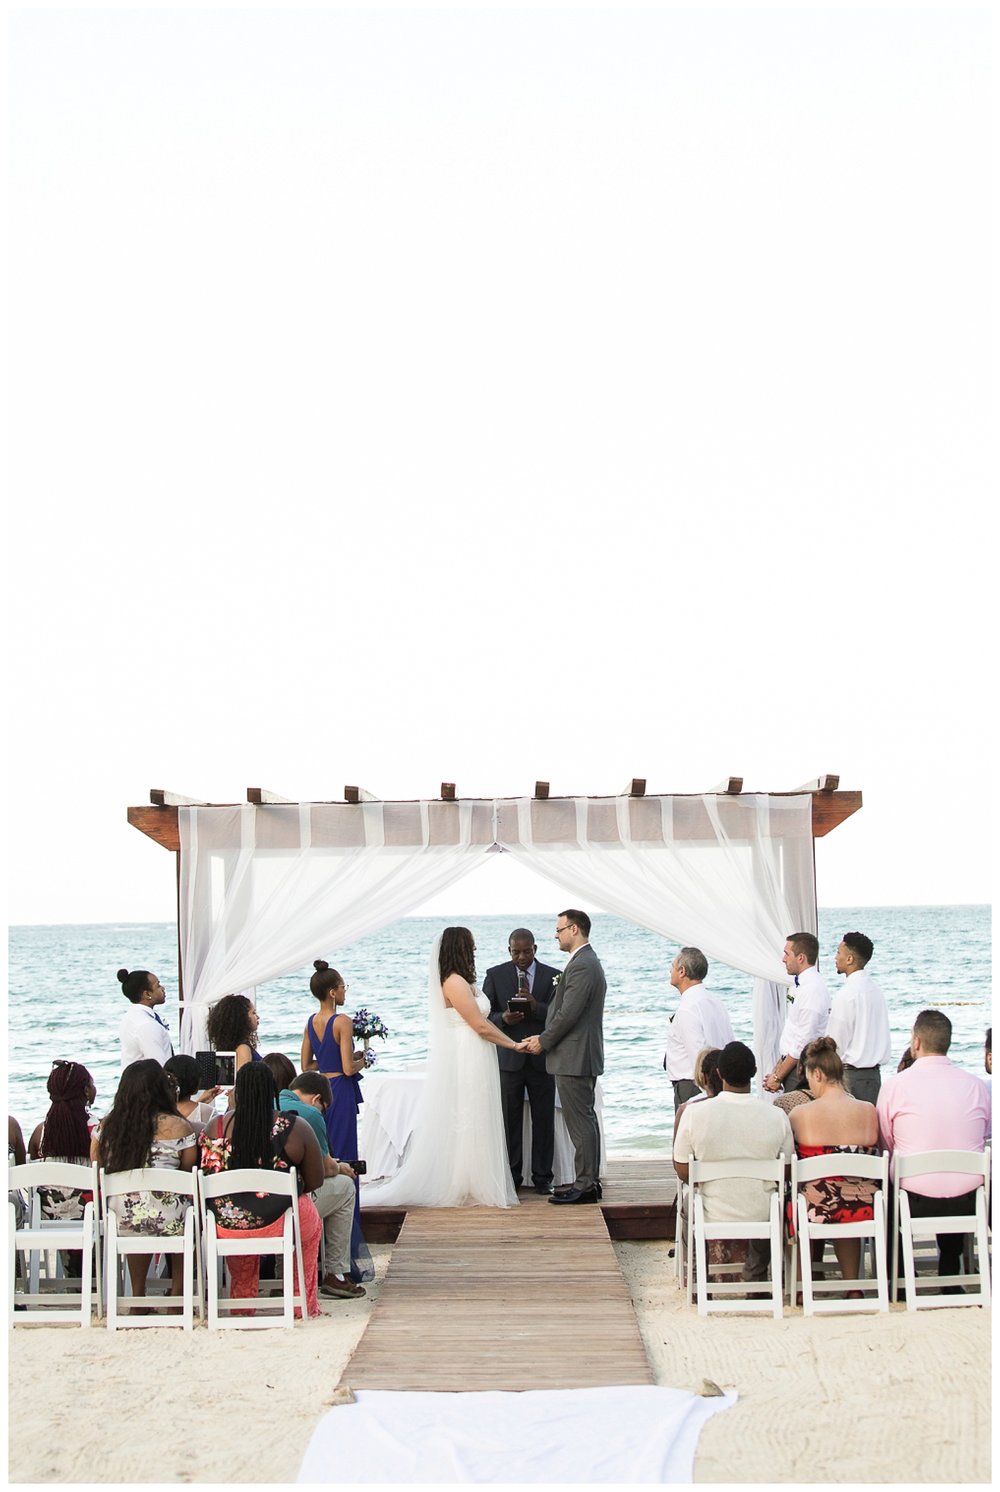 Jamaica wedding photographer creating colorful, vibrant, tropical images.